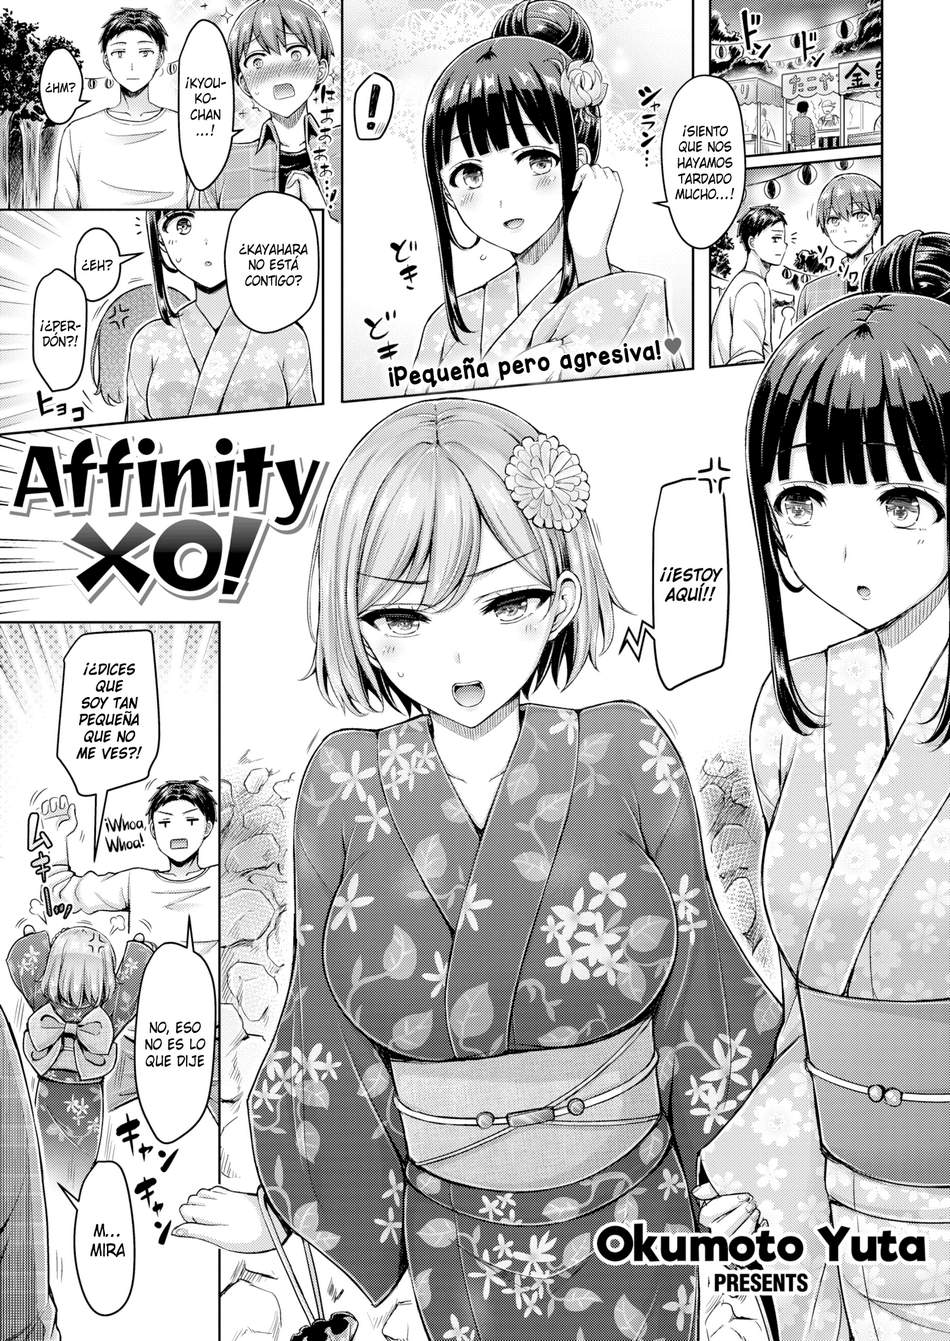 Affinity XO! - Page #1